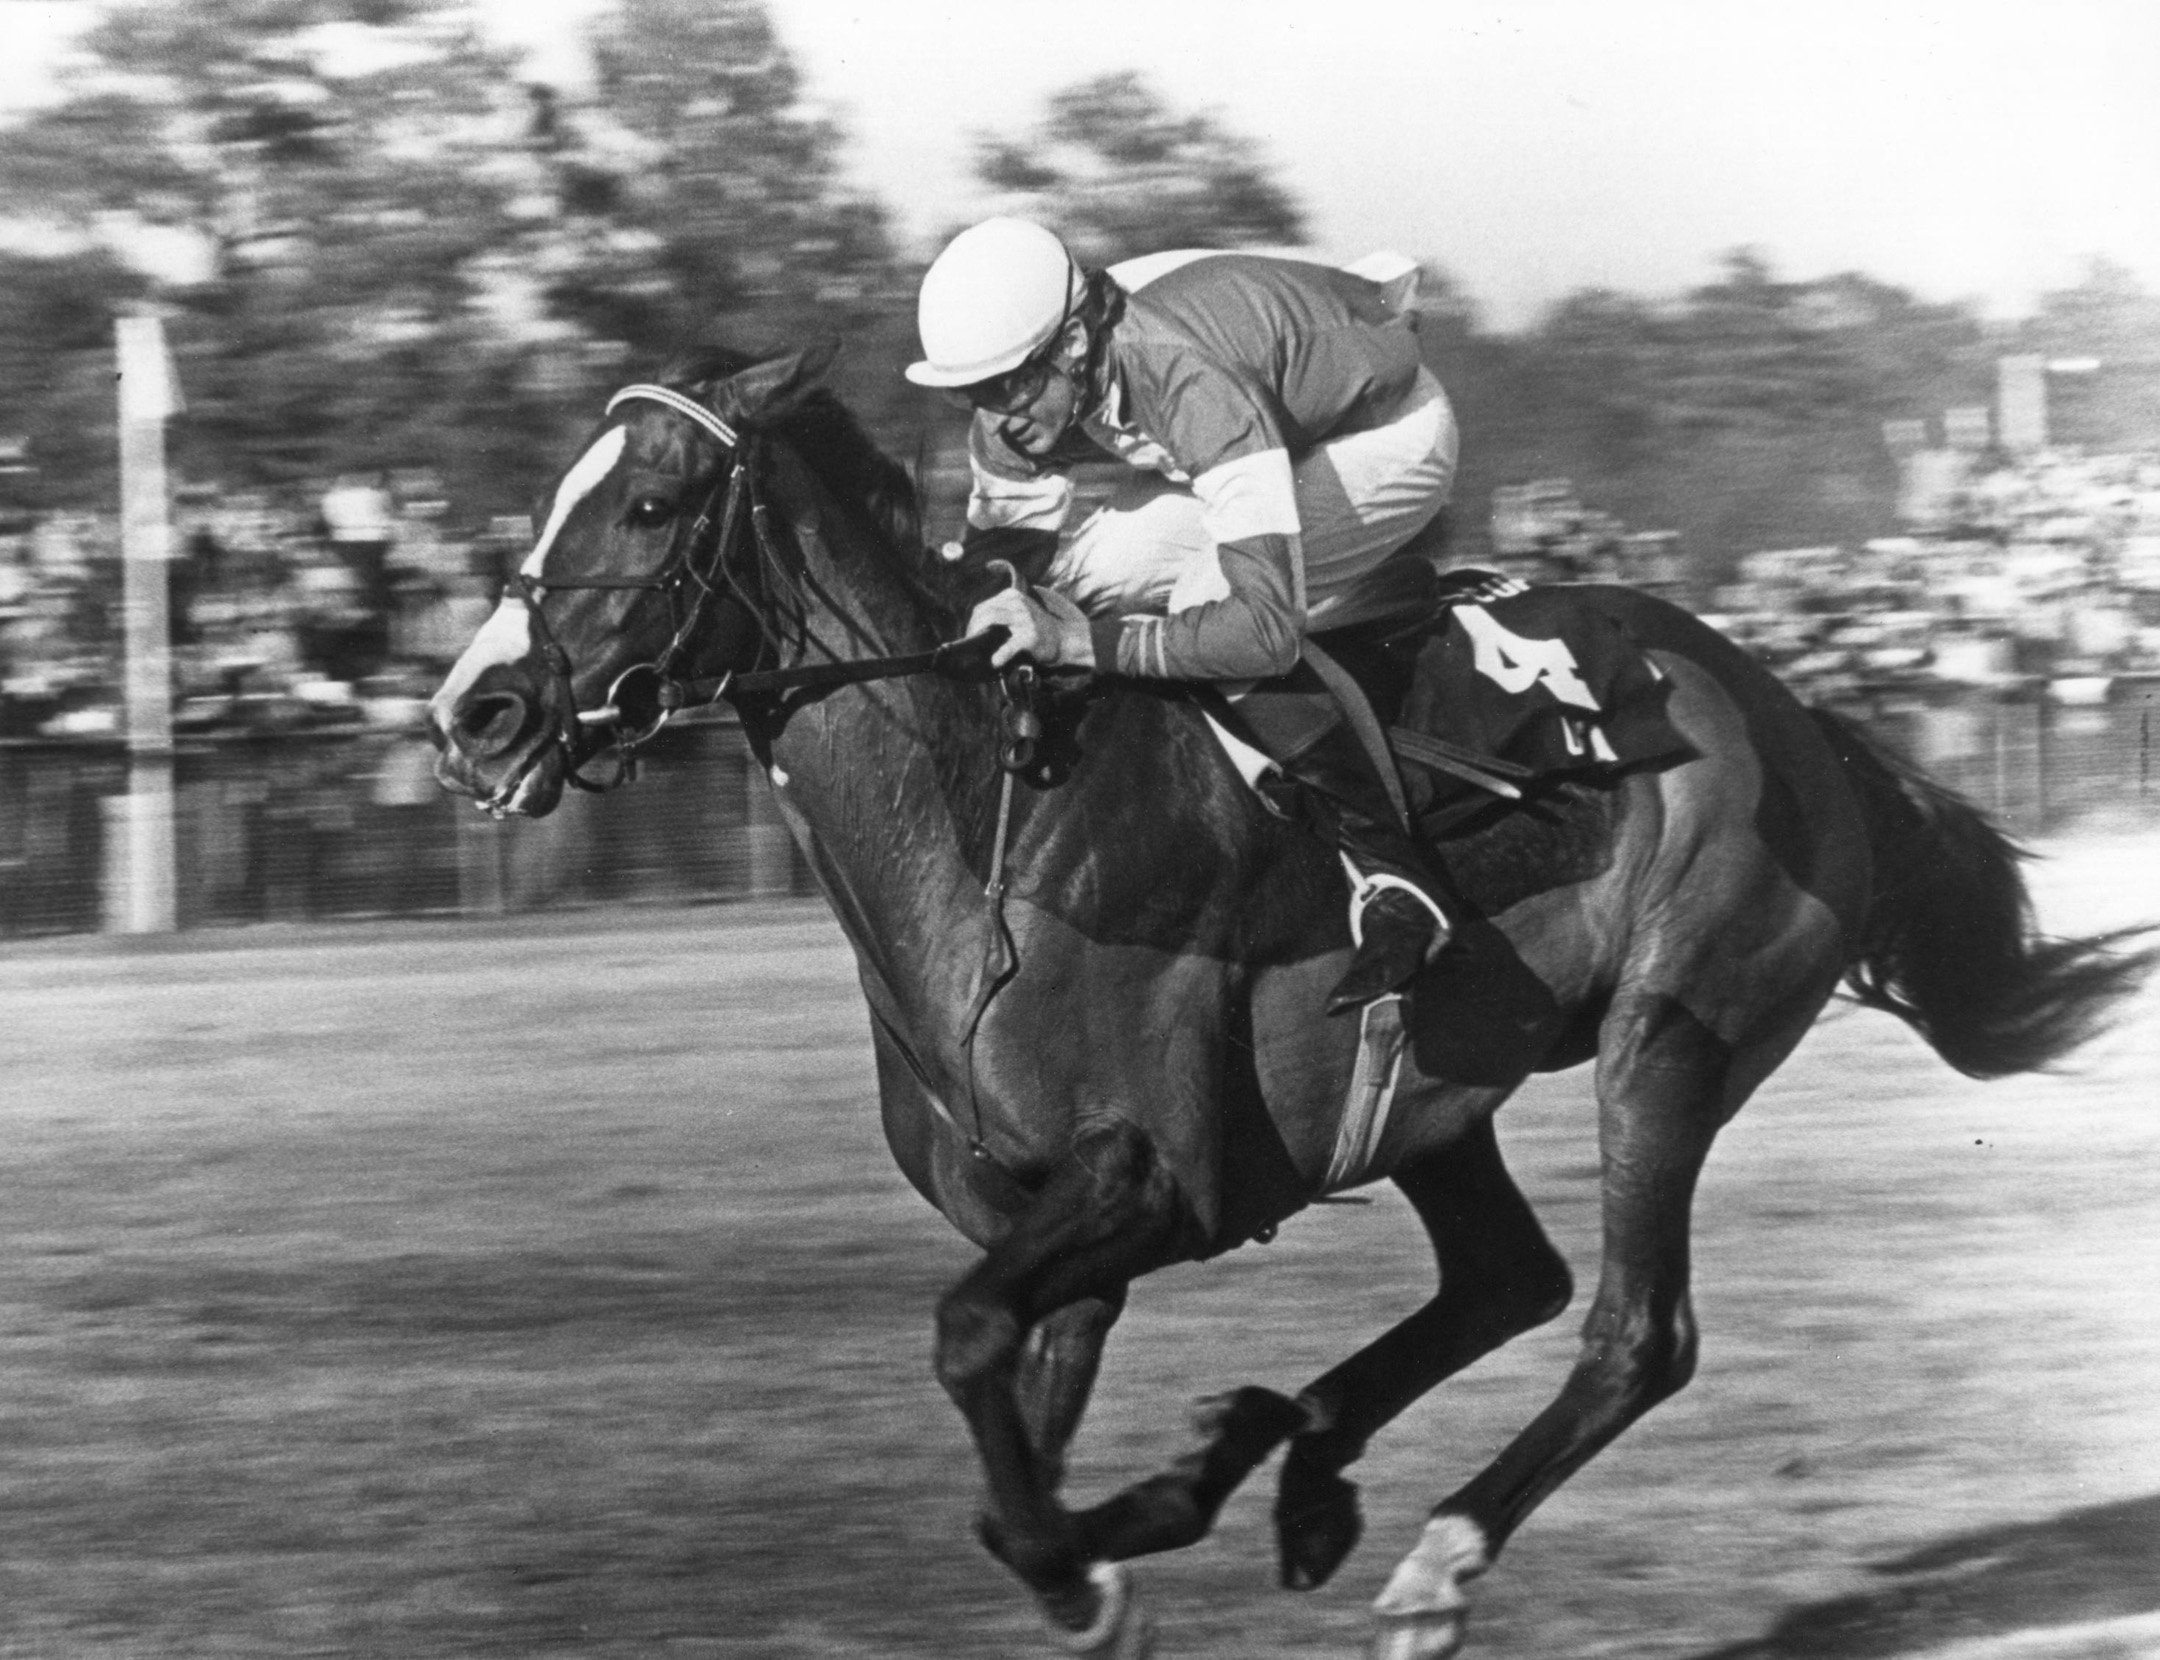 Zaccio (Greg Morris up) winning the 1981 Colonial Cup at Camden, S.C. (Milt Tobey/The BloodHorse /Museum Collection)